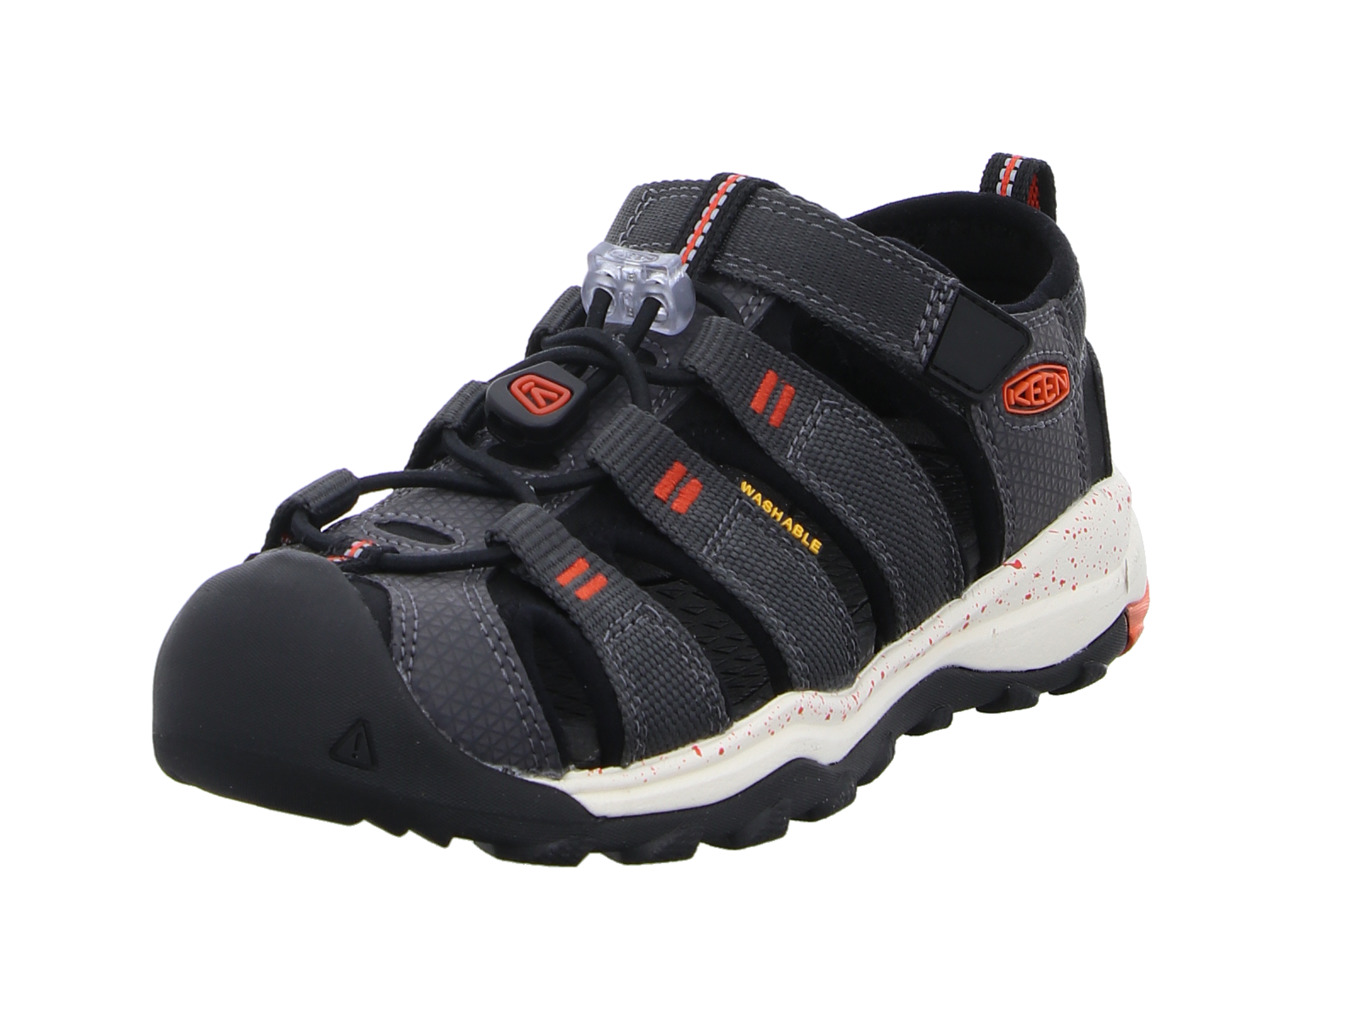 keen_newport_neo_h2_magnet_spicy_or_1018426_na_1173